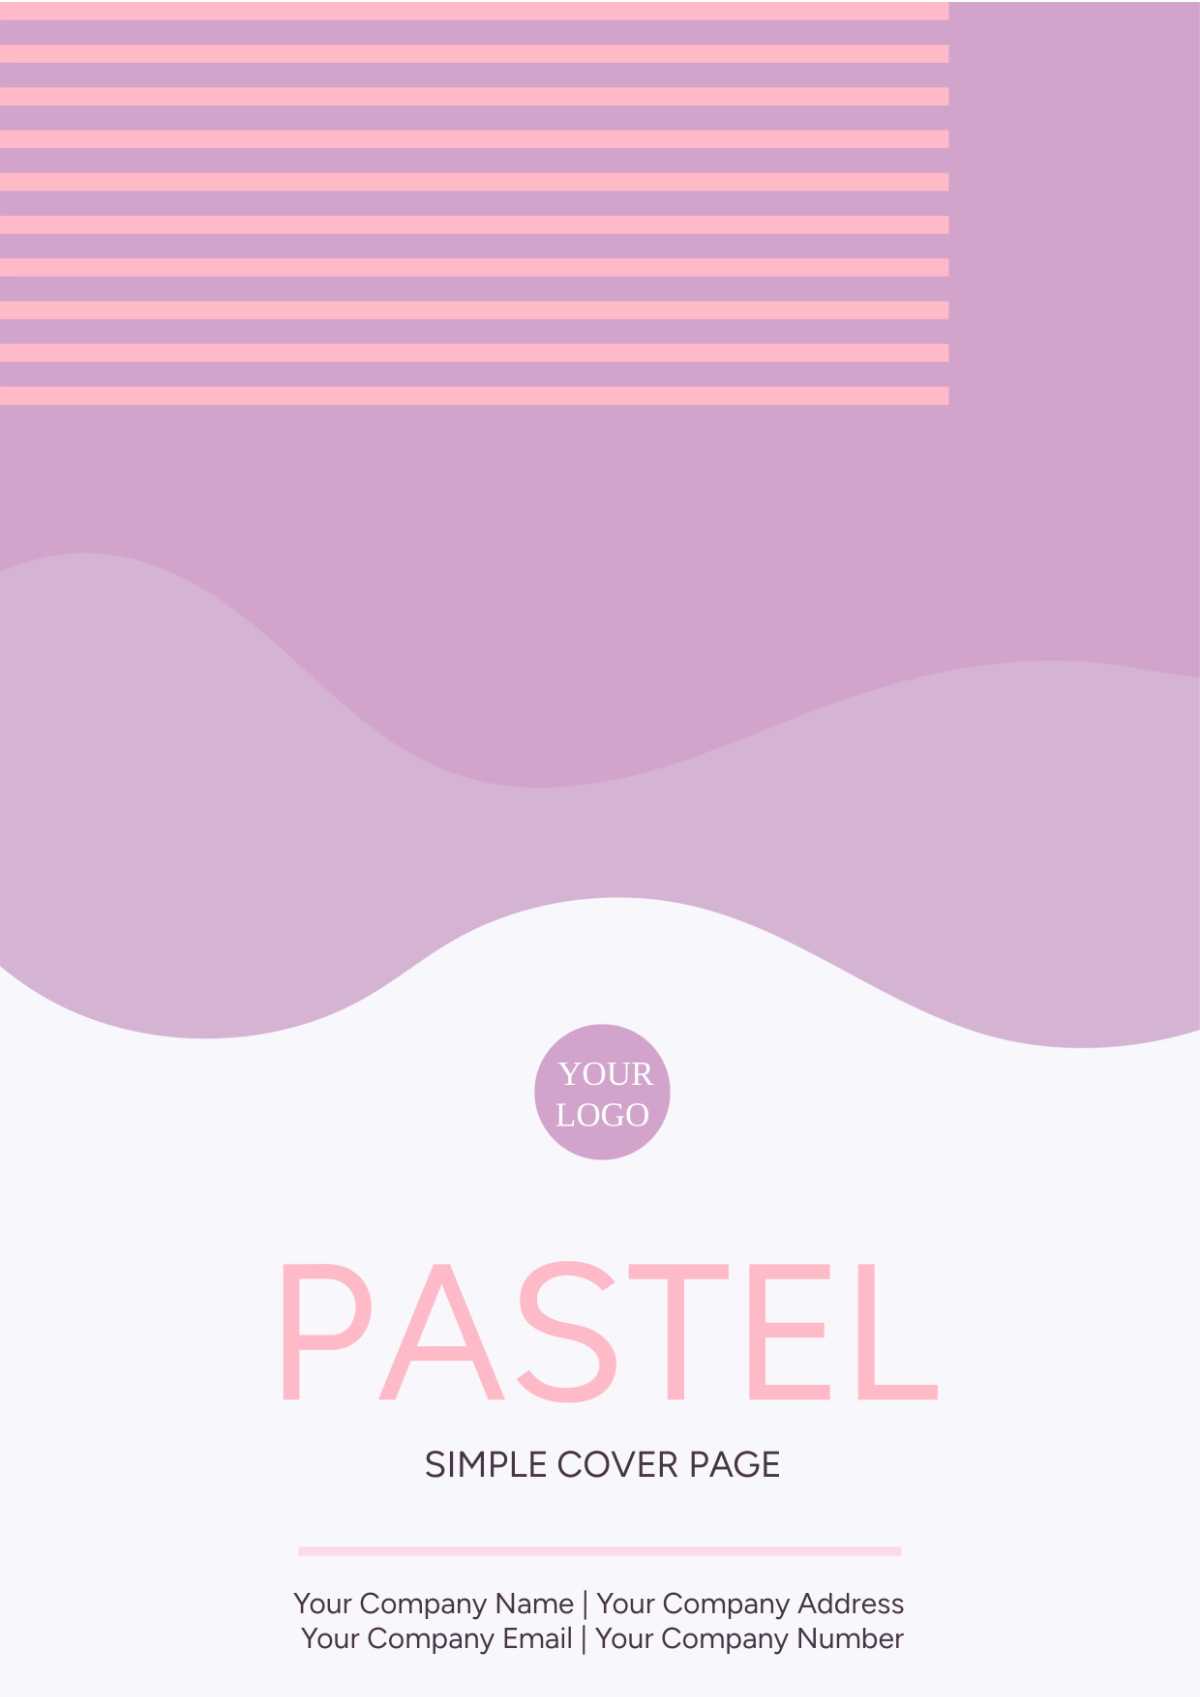 Pastel Simple Cover Page